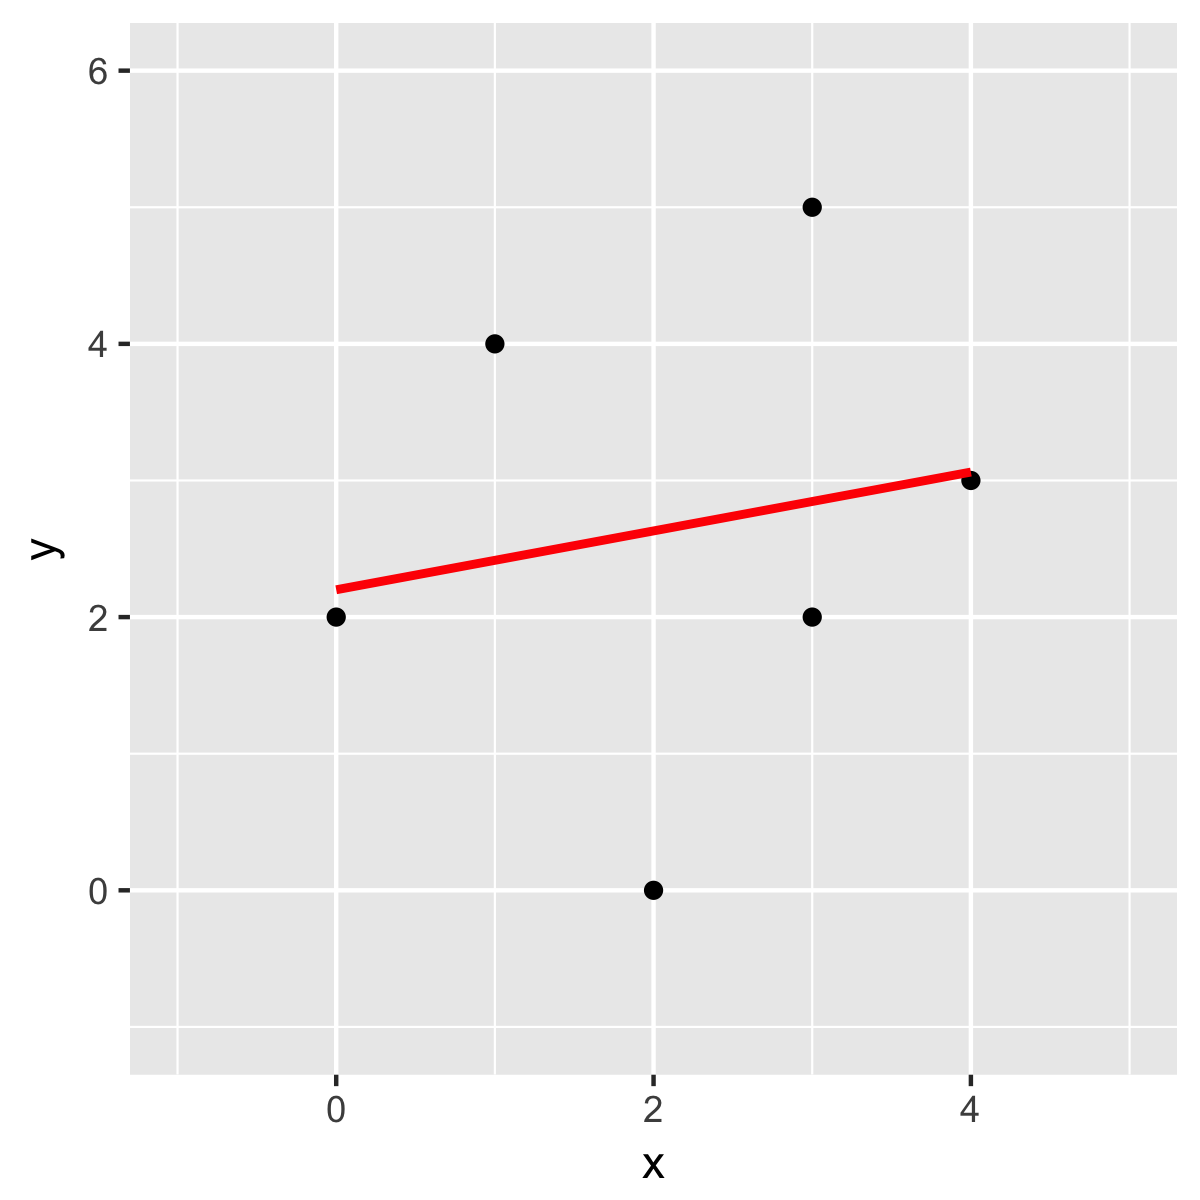 Fitting a line with another method (in R)